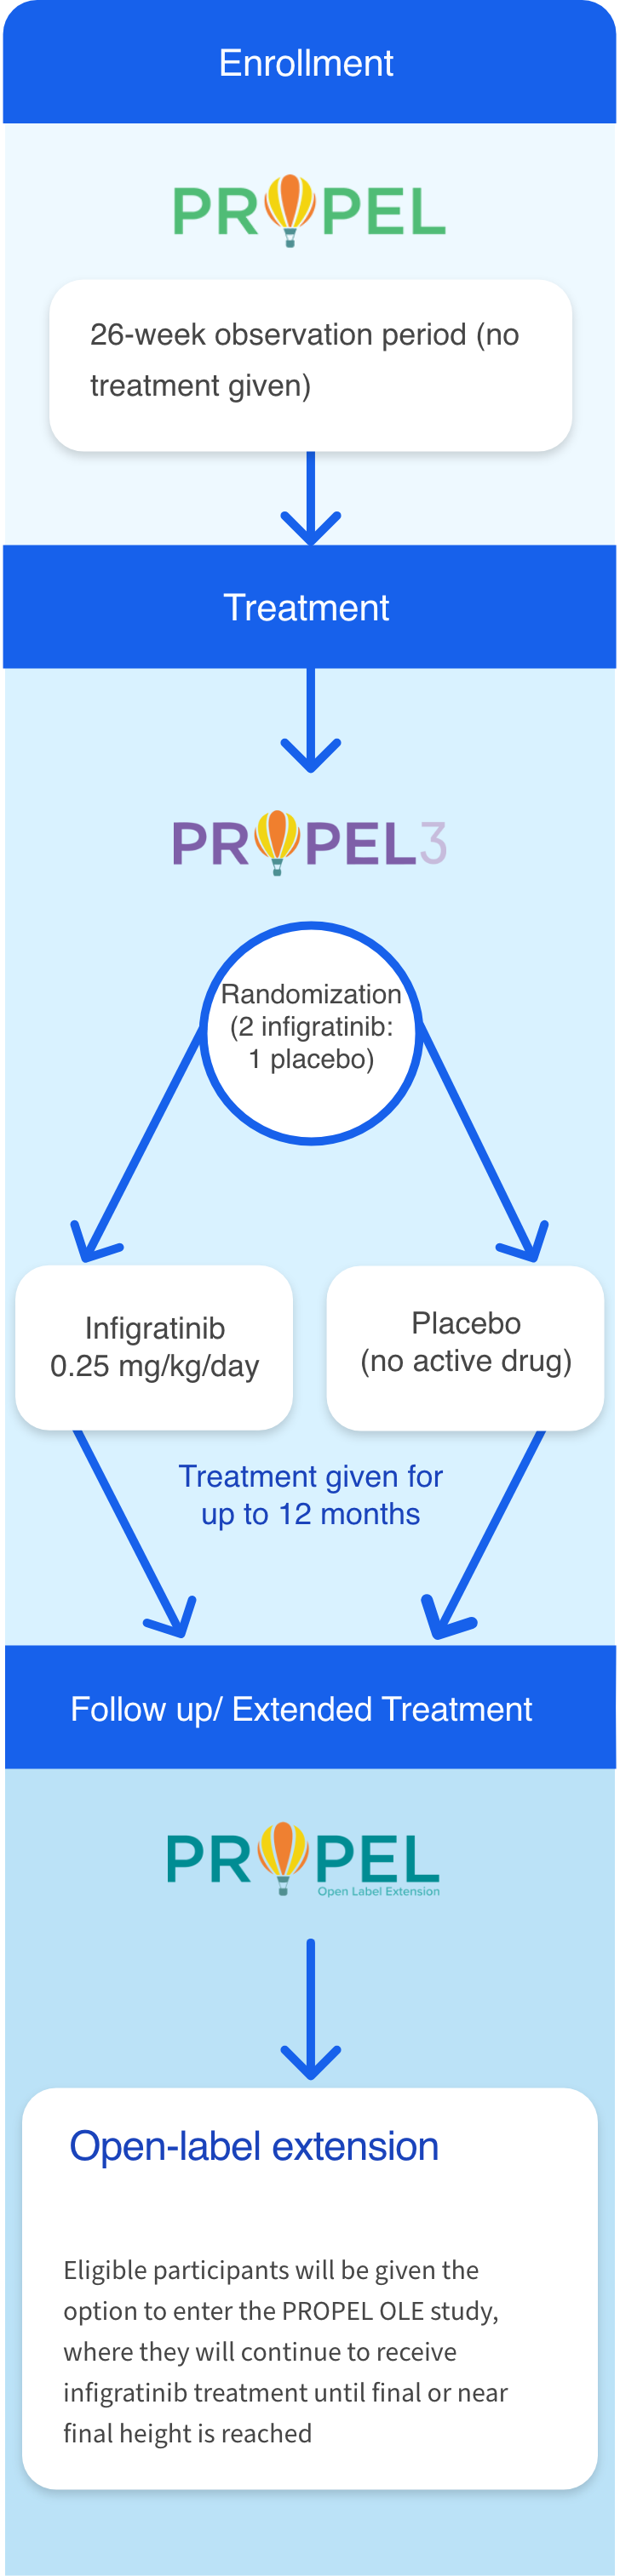 Flowchart infographic detailing the stages of the PROPEL clinical study. The first stage is 'Observation' with a 26-week period where no treatment is given. This leads to the 'Treatment' phase, labeled 'PROPEL 3,' where participants are randomized to receive either Infigratinib at a dose of 0.25 mg/kg/day or a placebo, with treatment lasting up to 12 months. The final stage is 'Extended treatment' under the 'PROPEL Open Label Extension,' where eligible participants have the option to continue receiving Infigratinib until their final or near final height is reached.